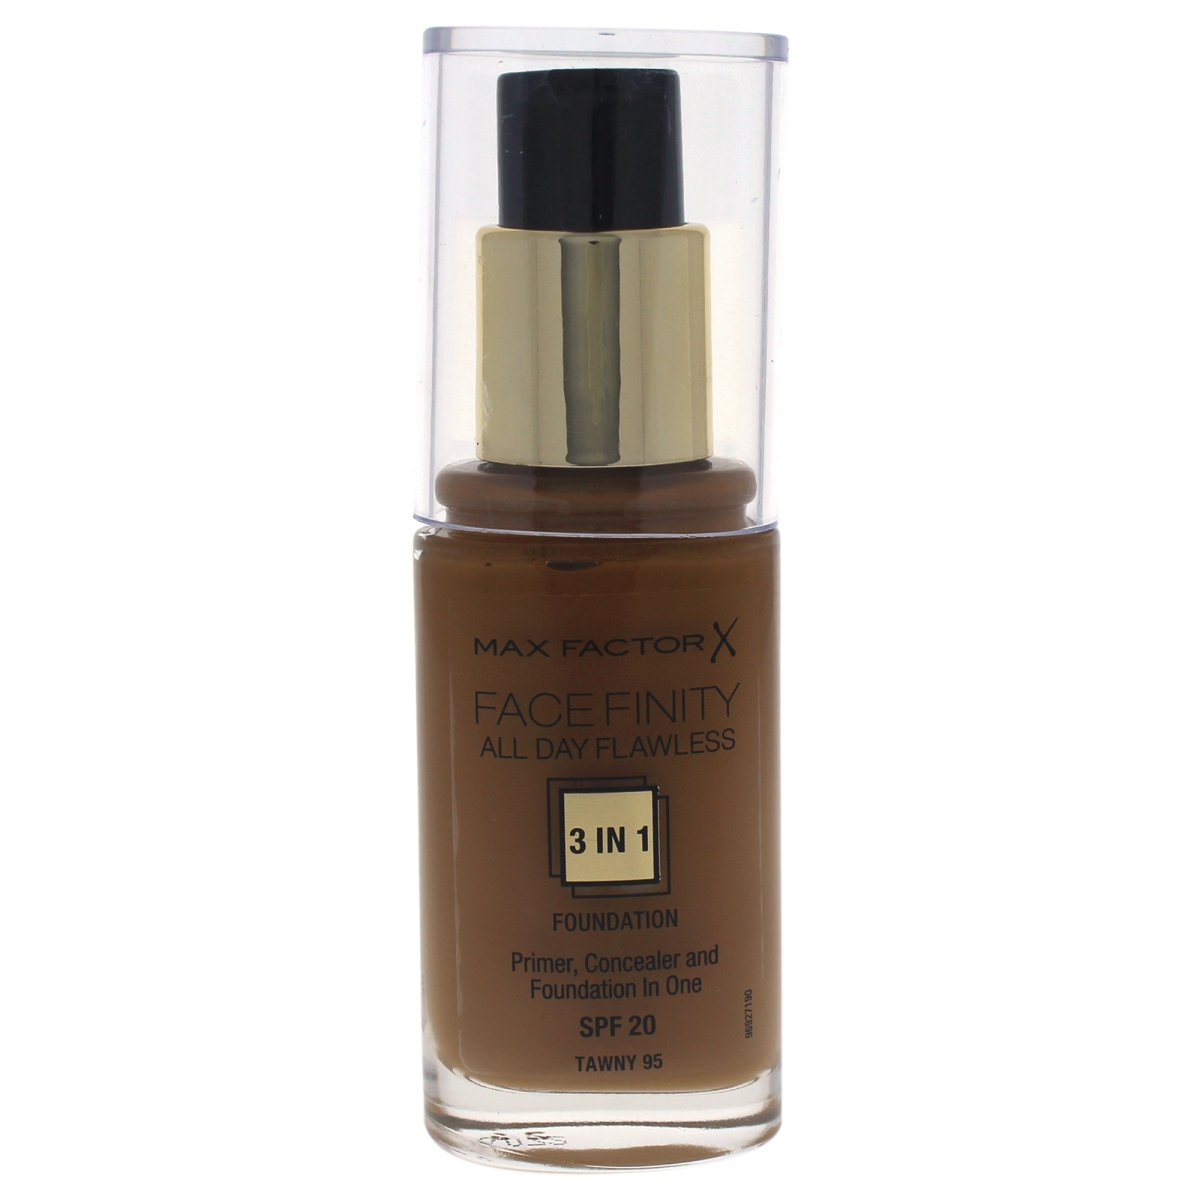 W-c-11240 30 Ml No. 95 Spf20 Facefinity All Day Flawless 3-in-1 Foundation - Tawny For Women